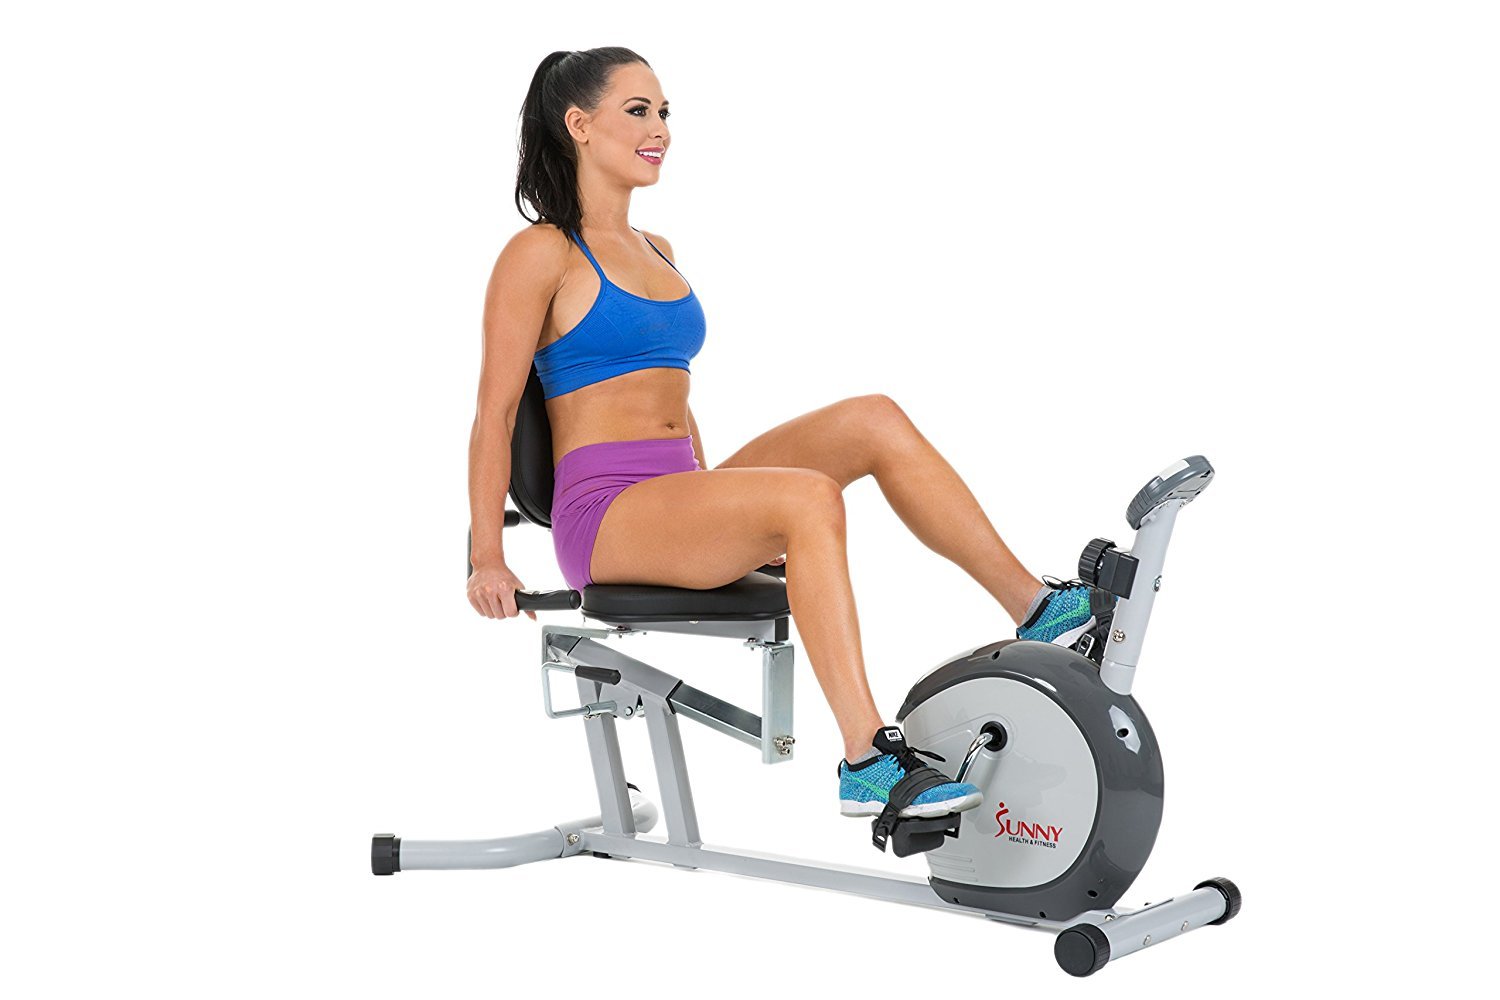 woman on an exercise bike suitable for her height